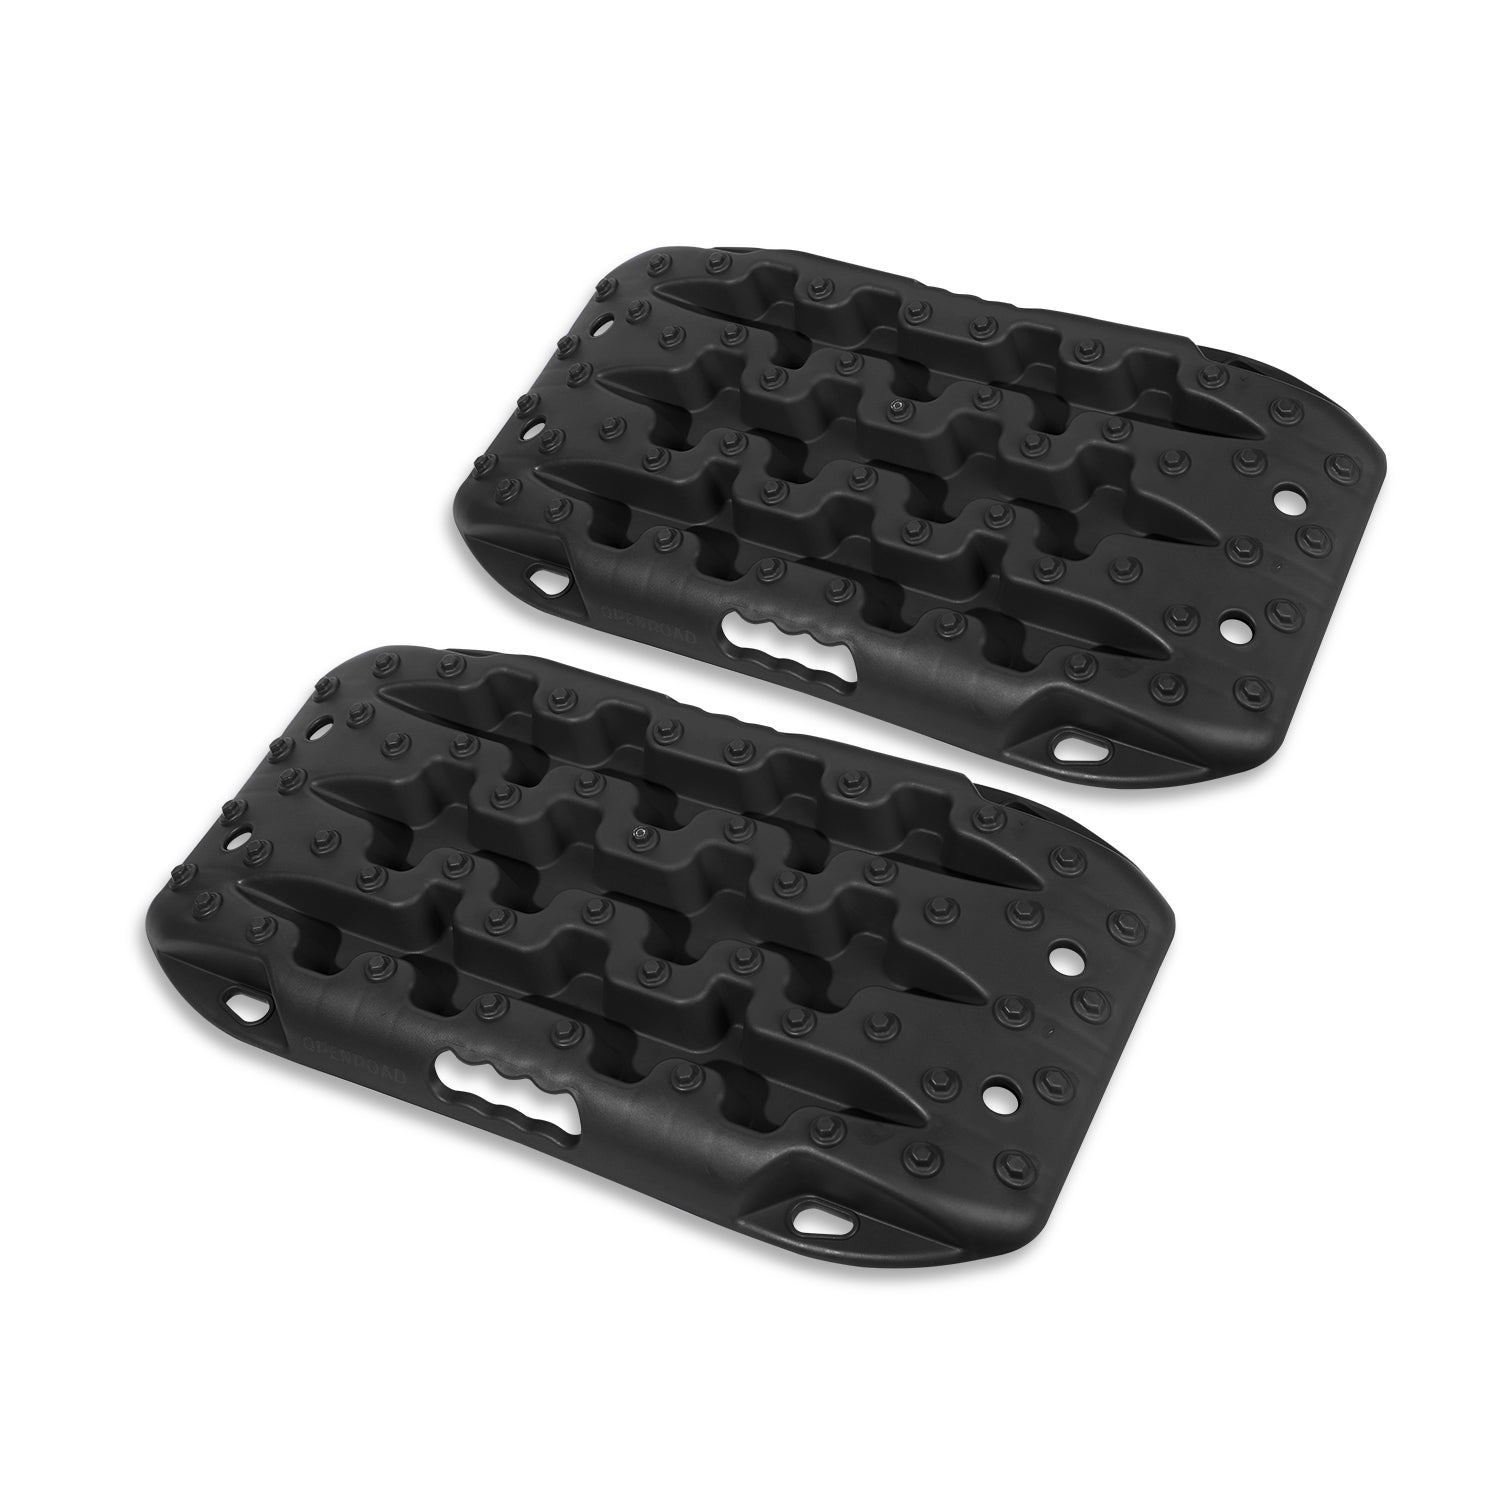 OPENROAD 5 Generation Off-Road Recovery Traction Boards (2pcs) | Black Recovery Traction Boards OPENROAD   